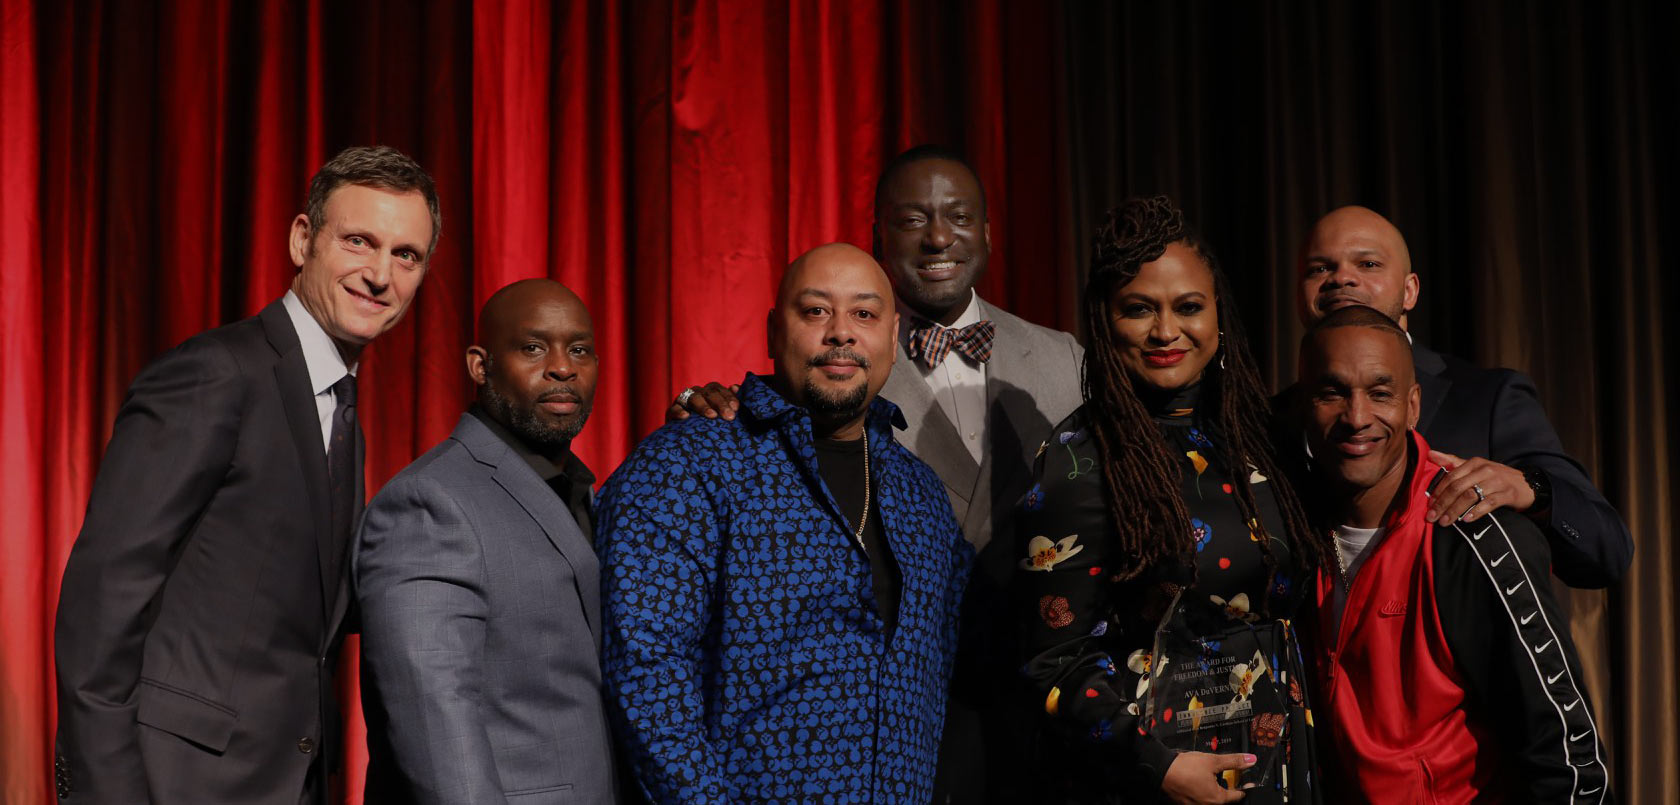 Tony Goldwyn, Antron McCray, Raymond Santana, Yusef Salaam, Korey Wise, and Kevin Richardson presenting Ava DuVernay with a Champion of Justice Award at the May 2019 Innocence Project benefit. Photo by Innocence Project/Matthew Adam Photography. 